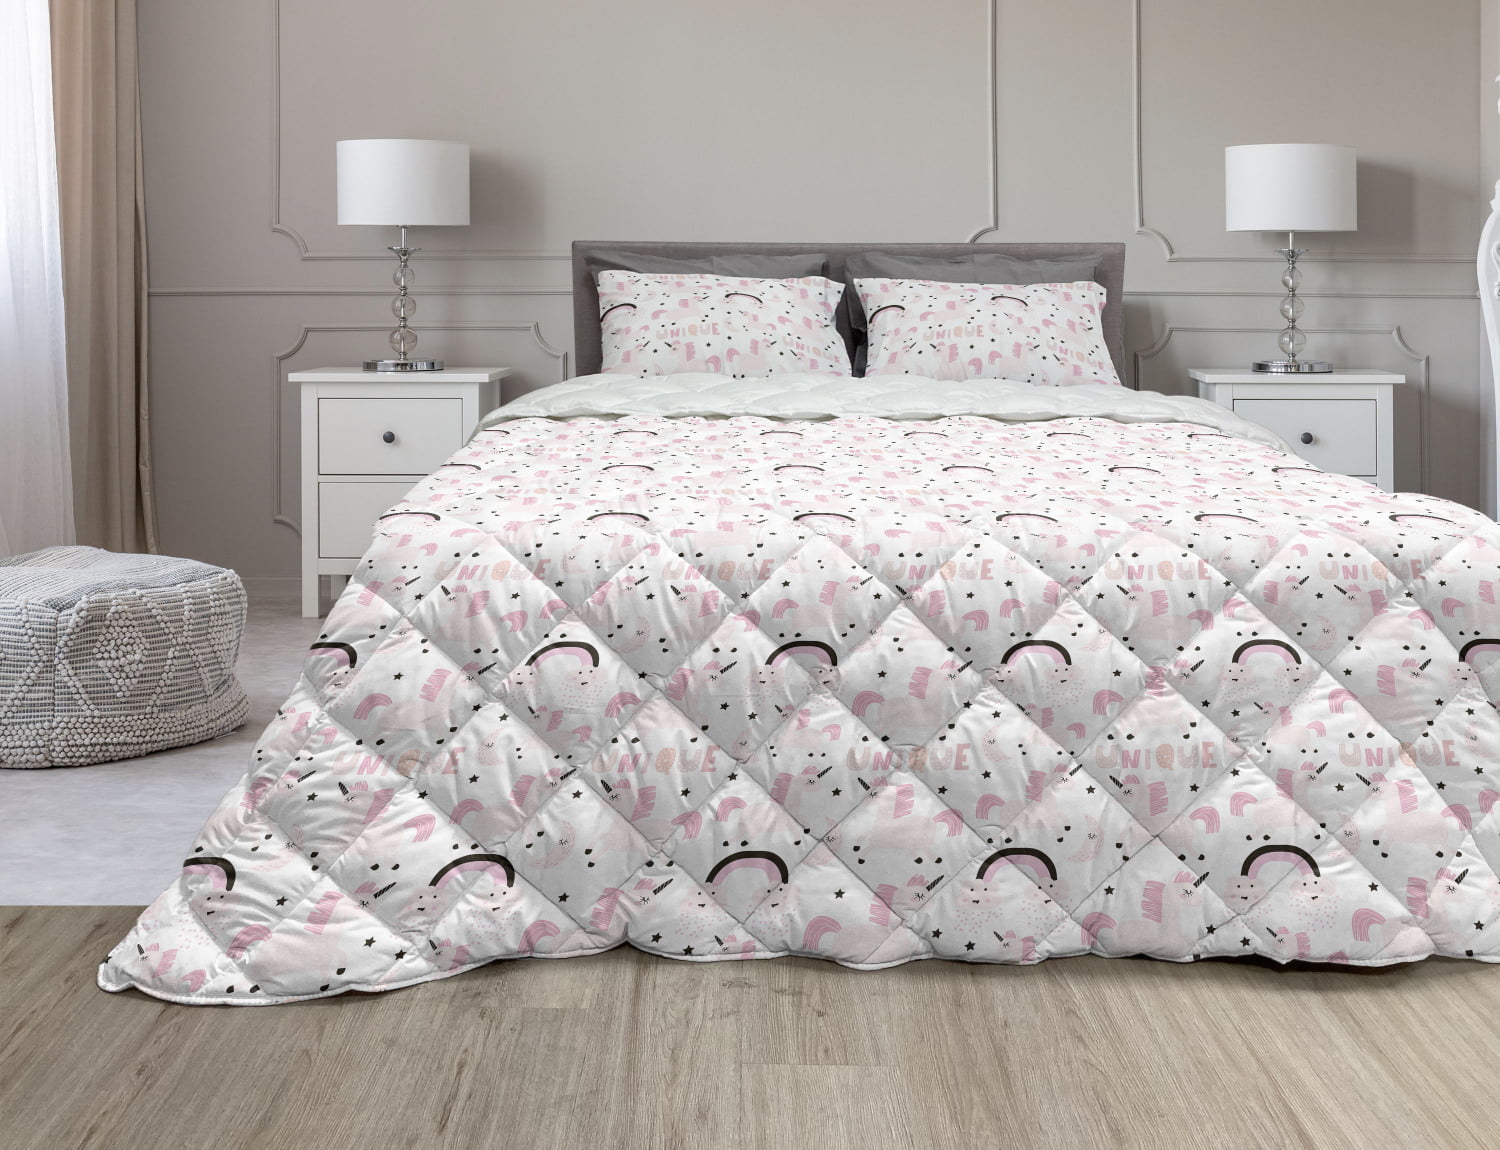 NATURE PATCHWORK BEDDING OR CURTAINS OWL BUNNY RABBIT FLOWERS HEART CREAM PINK 